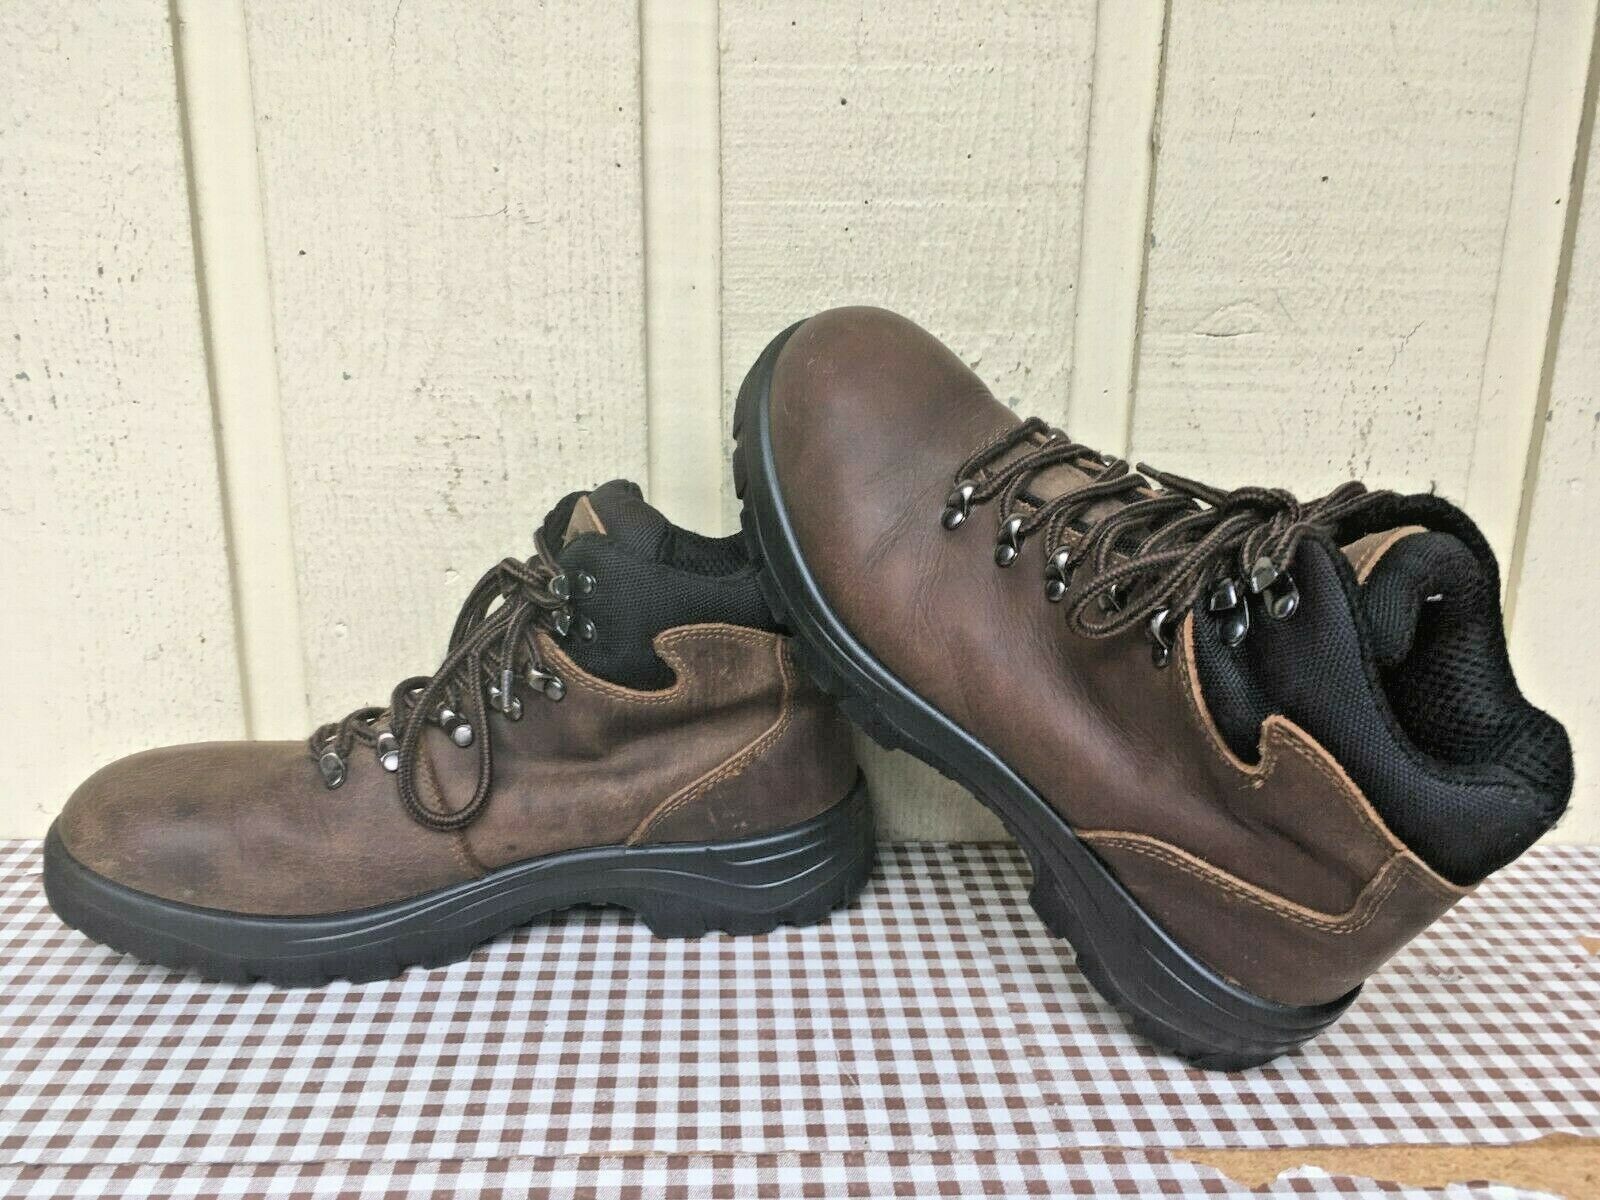 Prospector Georgian 75014 Men's Leather Hiking Boots Size 10 Wide (EE). Brown